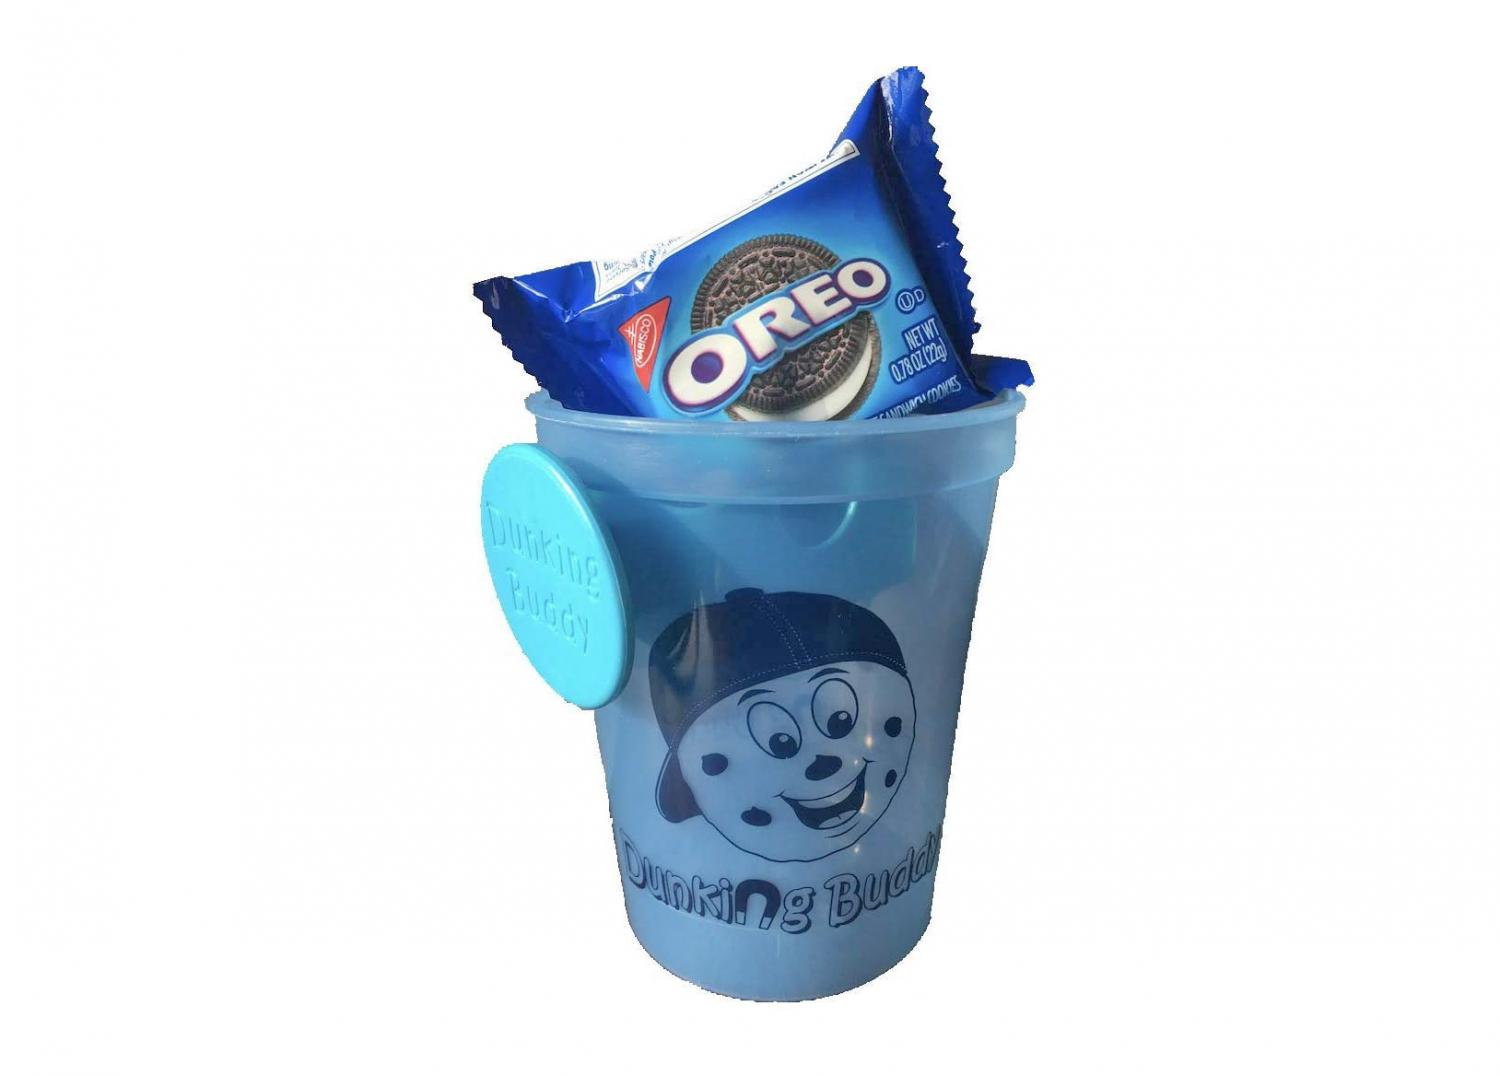 AIEVE Cookie Dunker Compatible with Oreo, Cute Giraffe Cookie